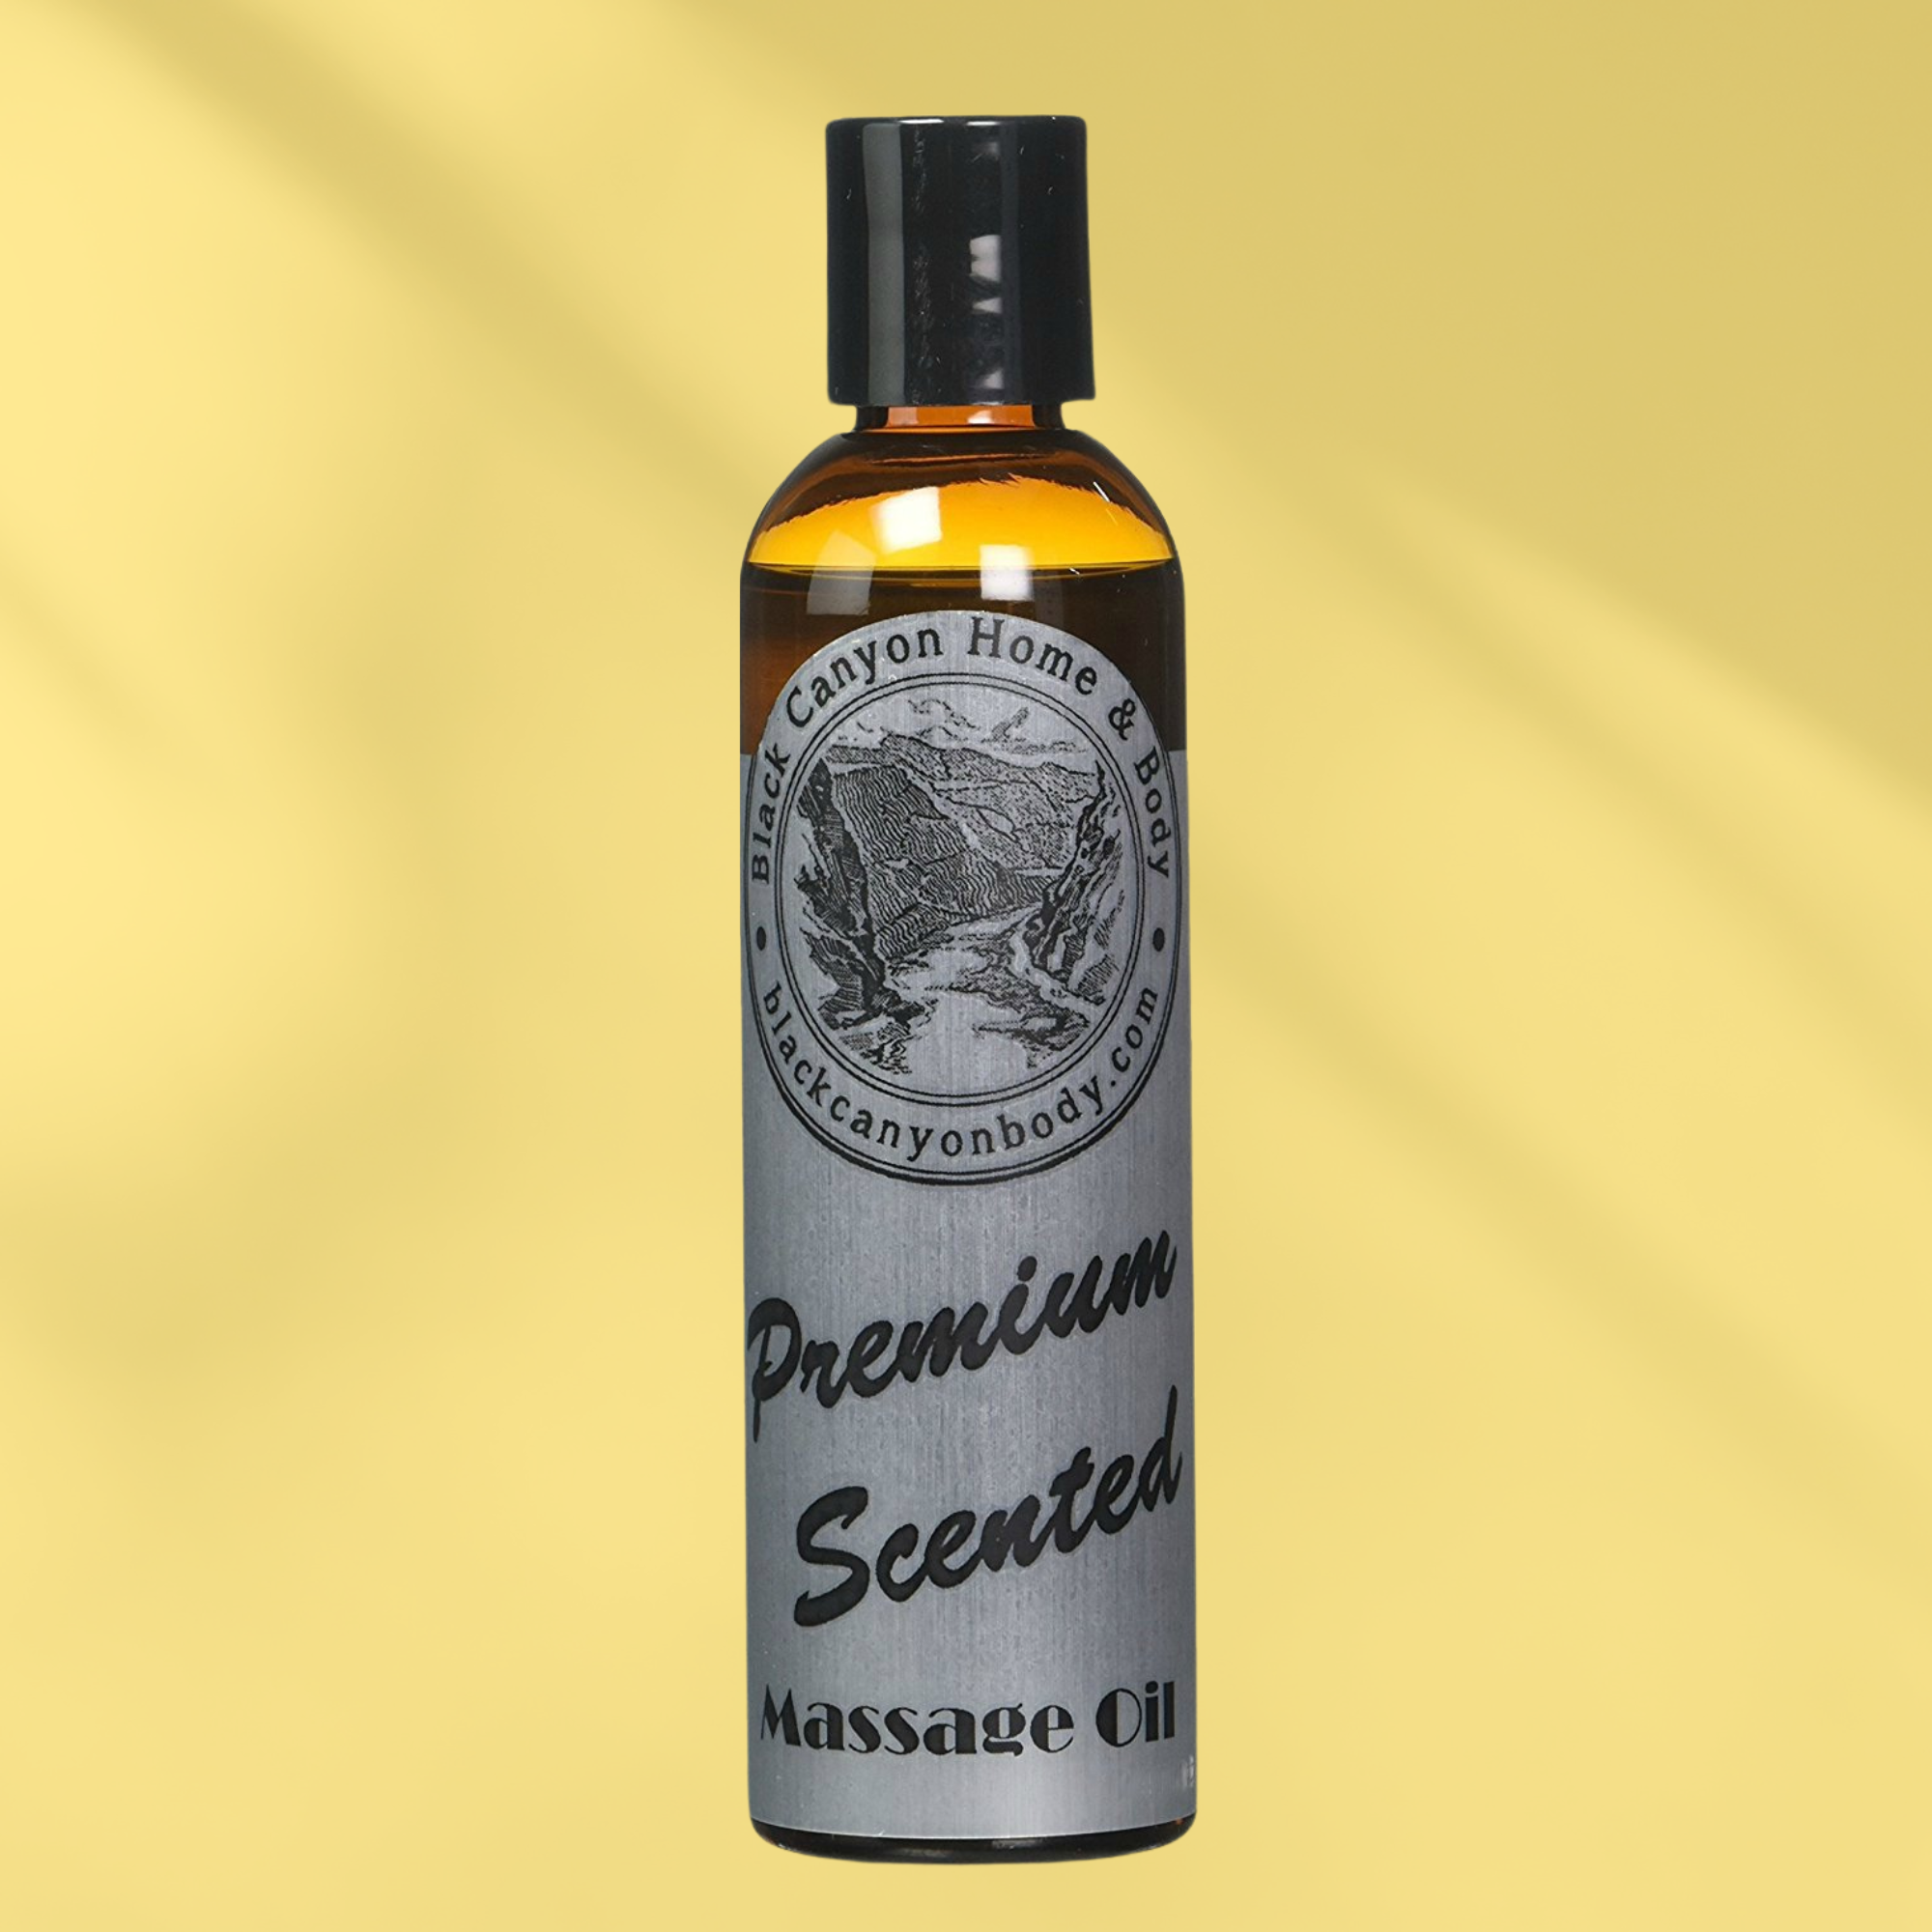 Black Canyon Honeysuckle & Lilac Scented Massage Oil